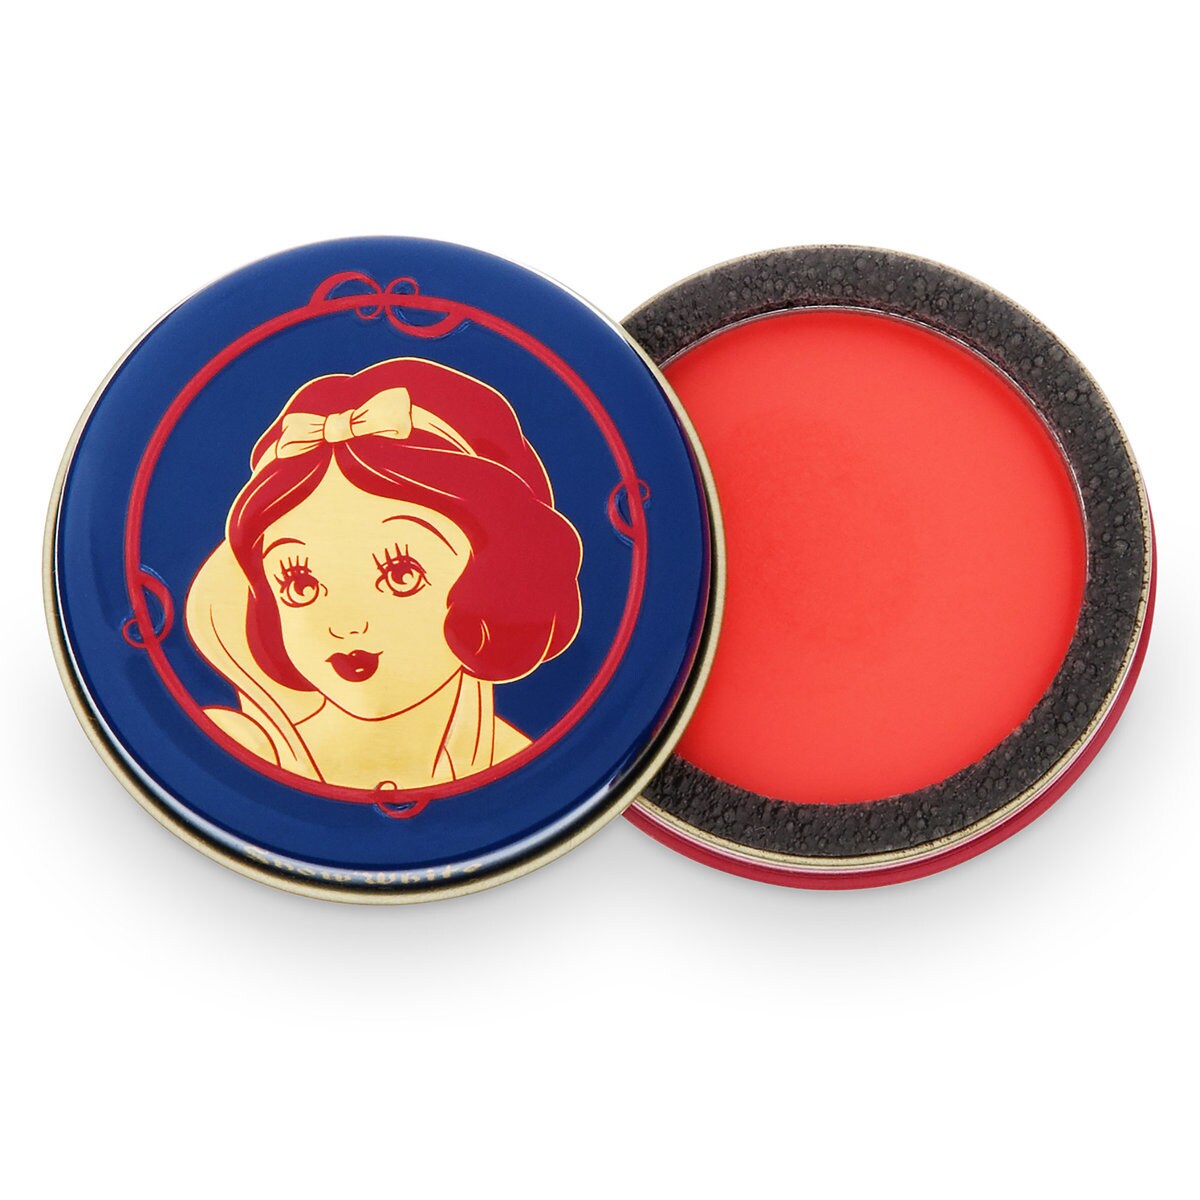 Snow White ''With a Smile and a Song'' Cream Blush by Bésame Cosmetics